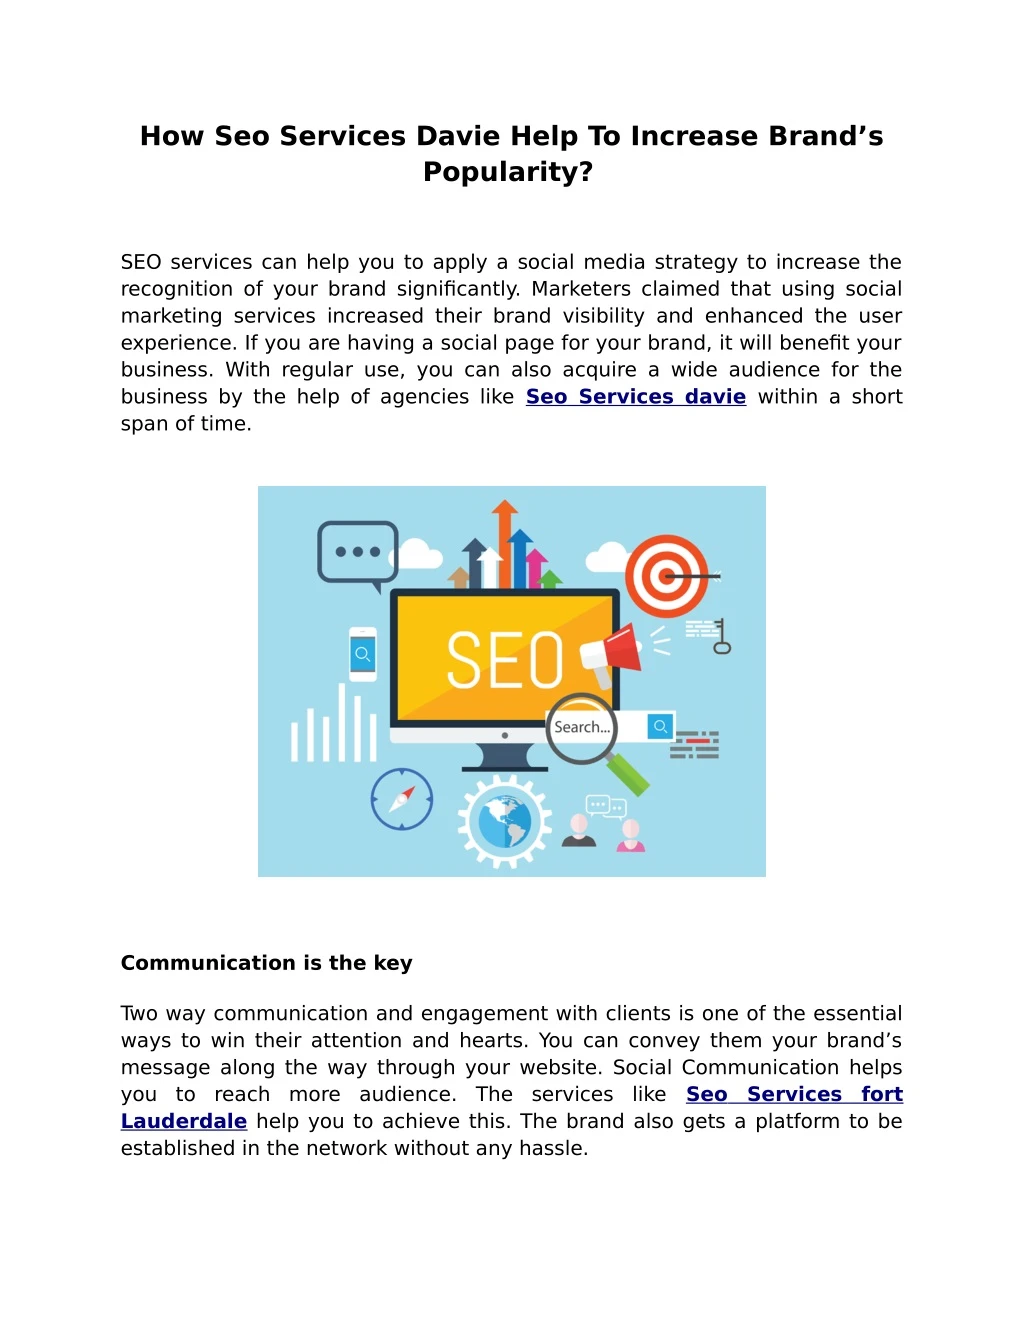 how seo services davie help to increase brand